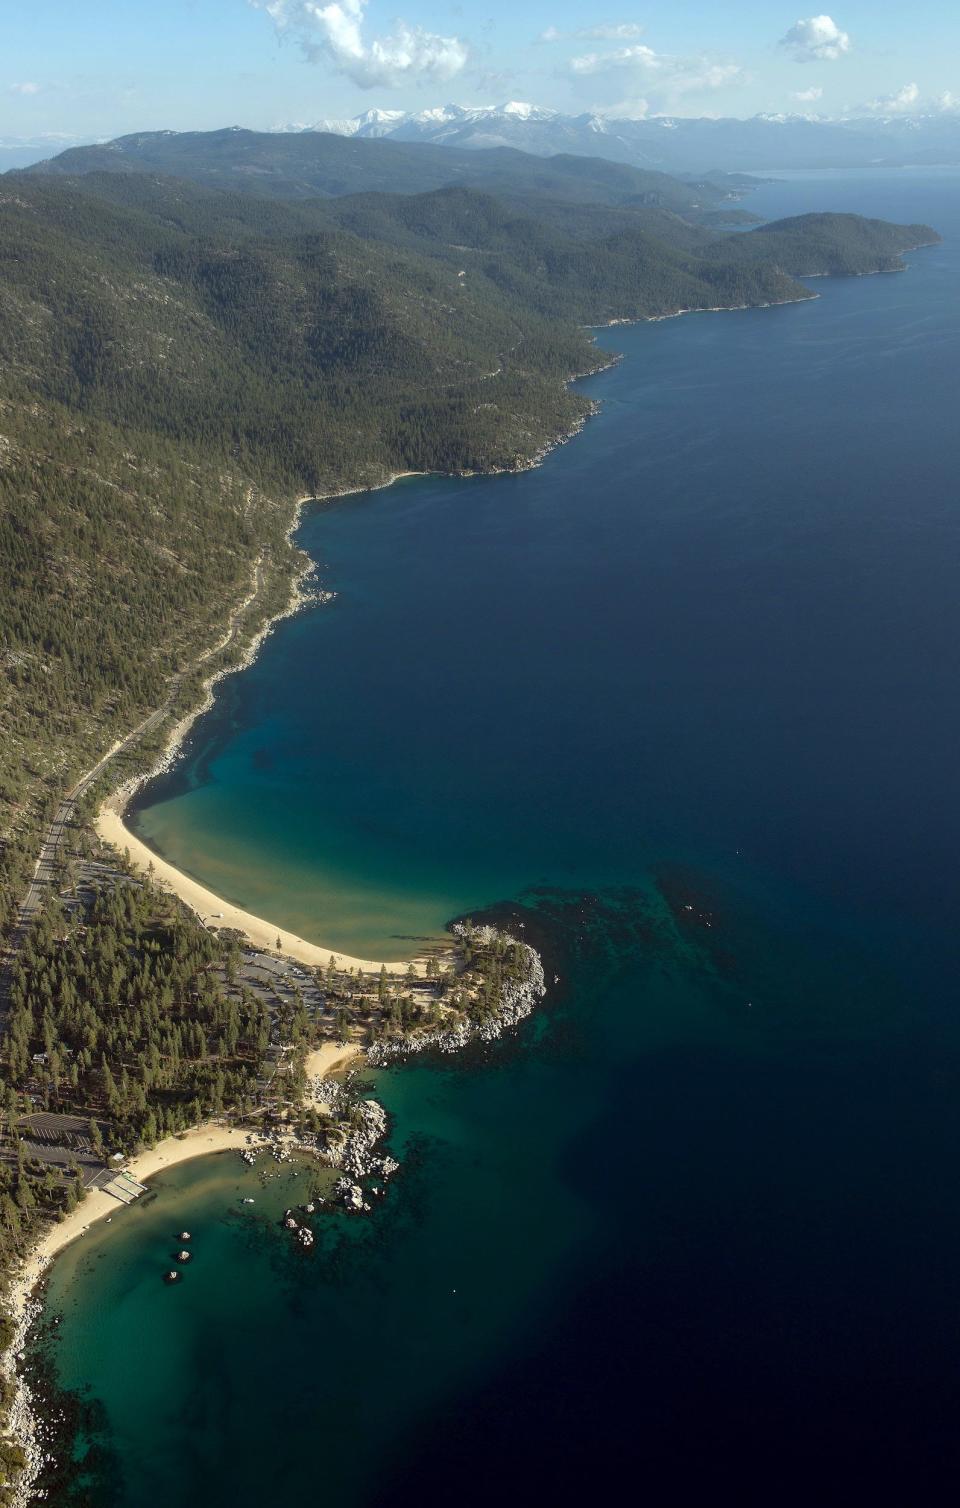 An aerial view of the shoreline of Lake Tahoe